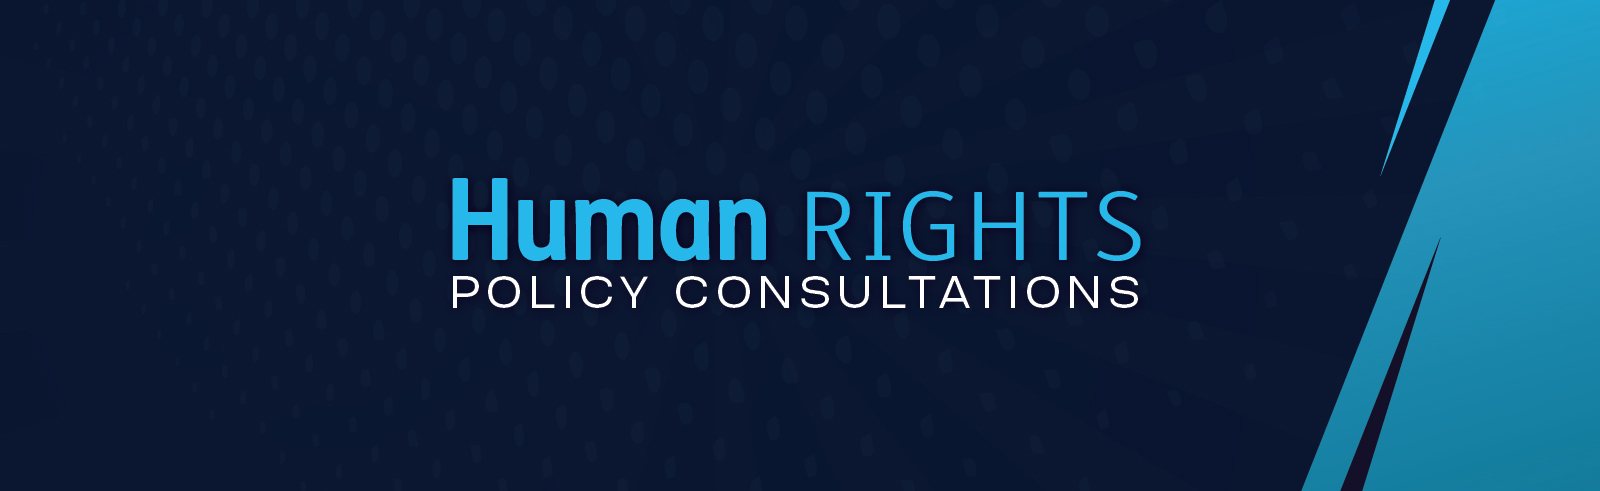 Human Rights Policy Consultations text on dark blue background